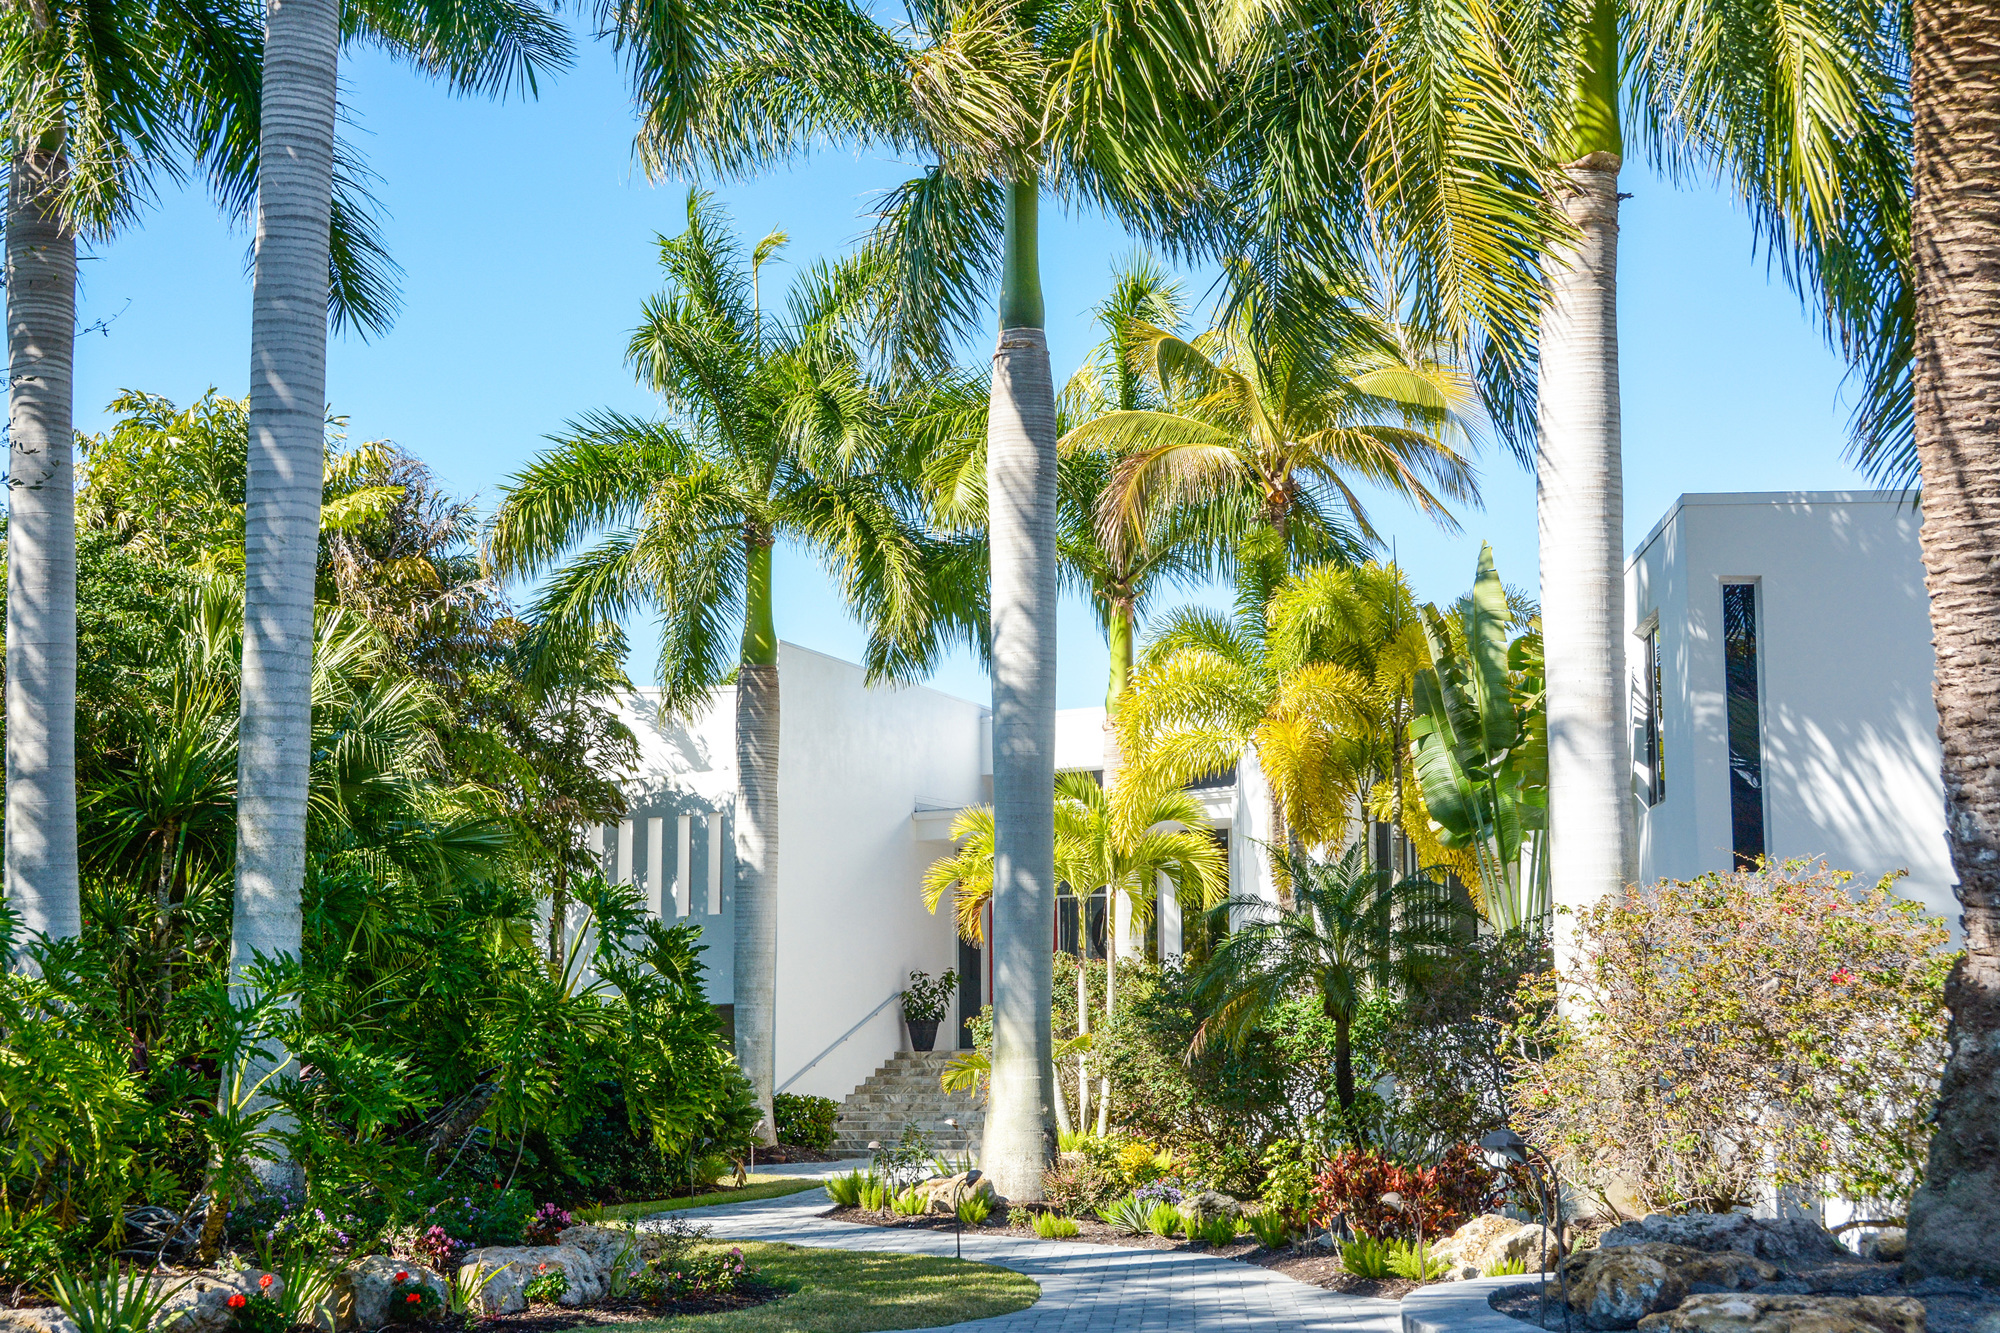 Courtesy photo. Palm trees structure the landscape that surrounds this modern Siesta Key home.